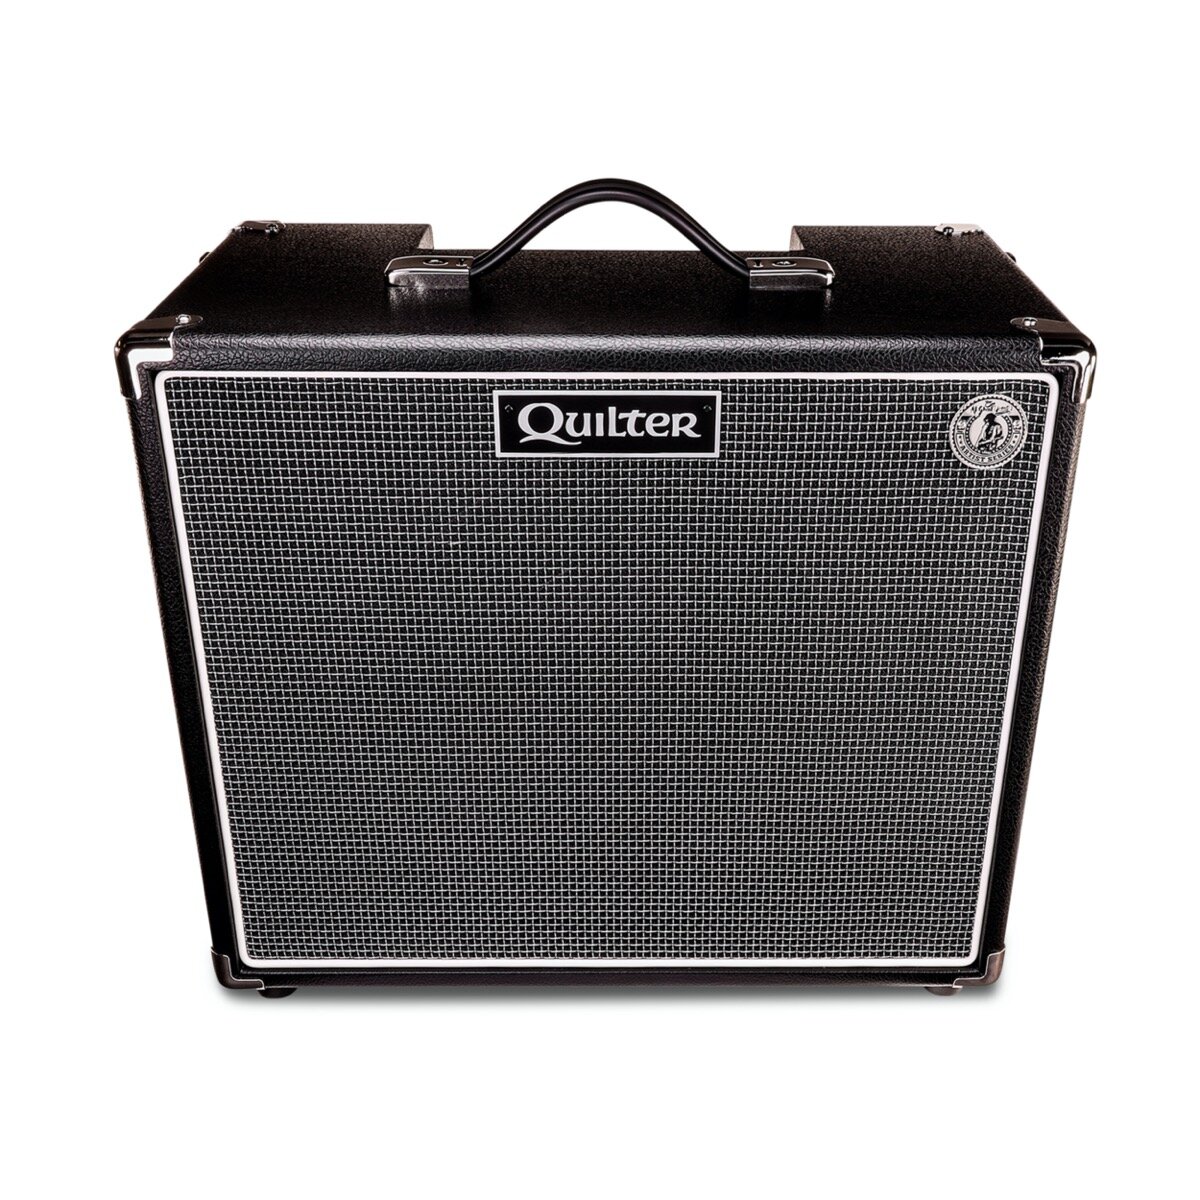 Qulter AJ Ghent OD202 BlockDock 12 Combo 200 Watts -  Quilter, AJ GHENT 12